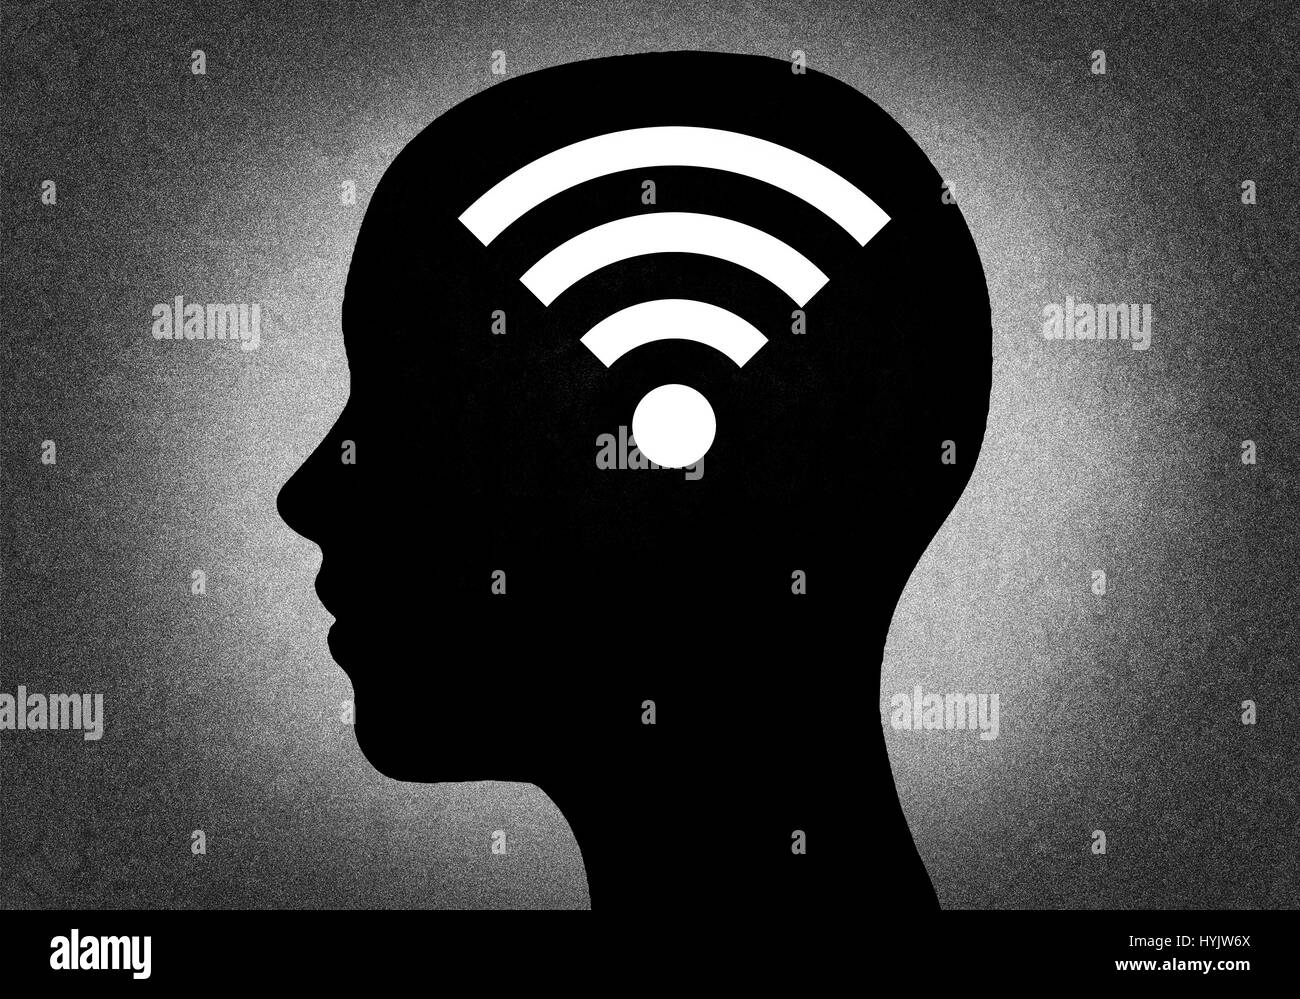 Silhouette of head with wifi signal Stock Photo